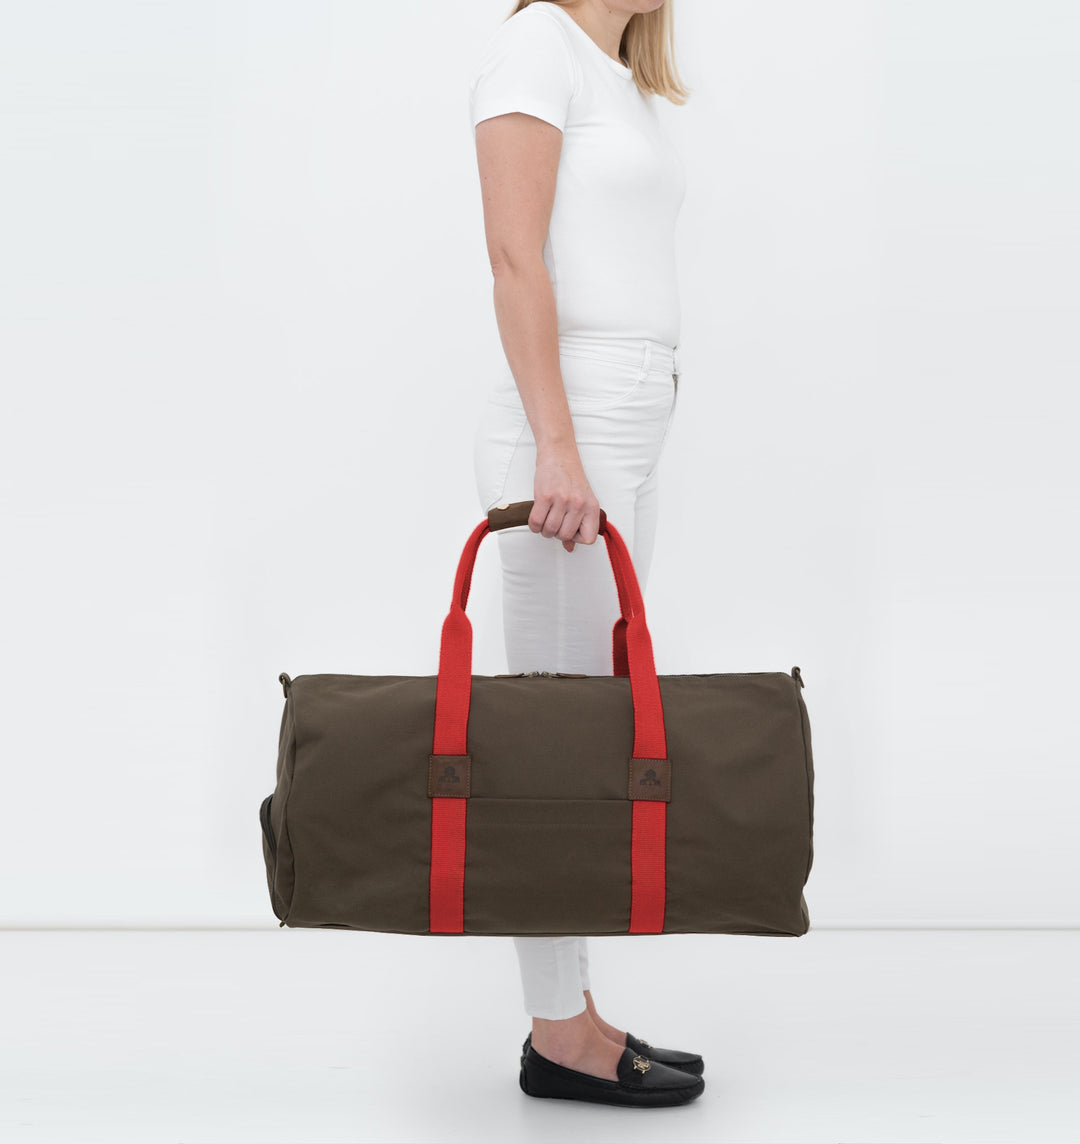 Duffle bag -L- KHAKI with red strap